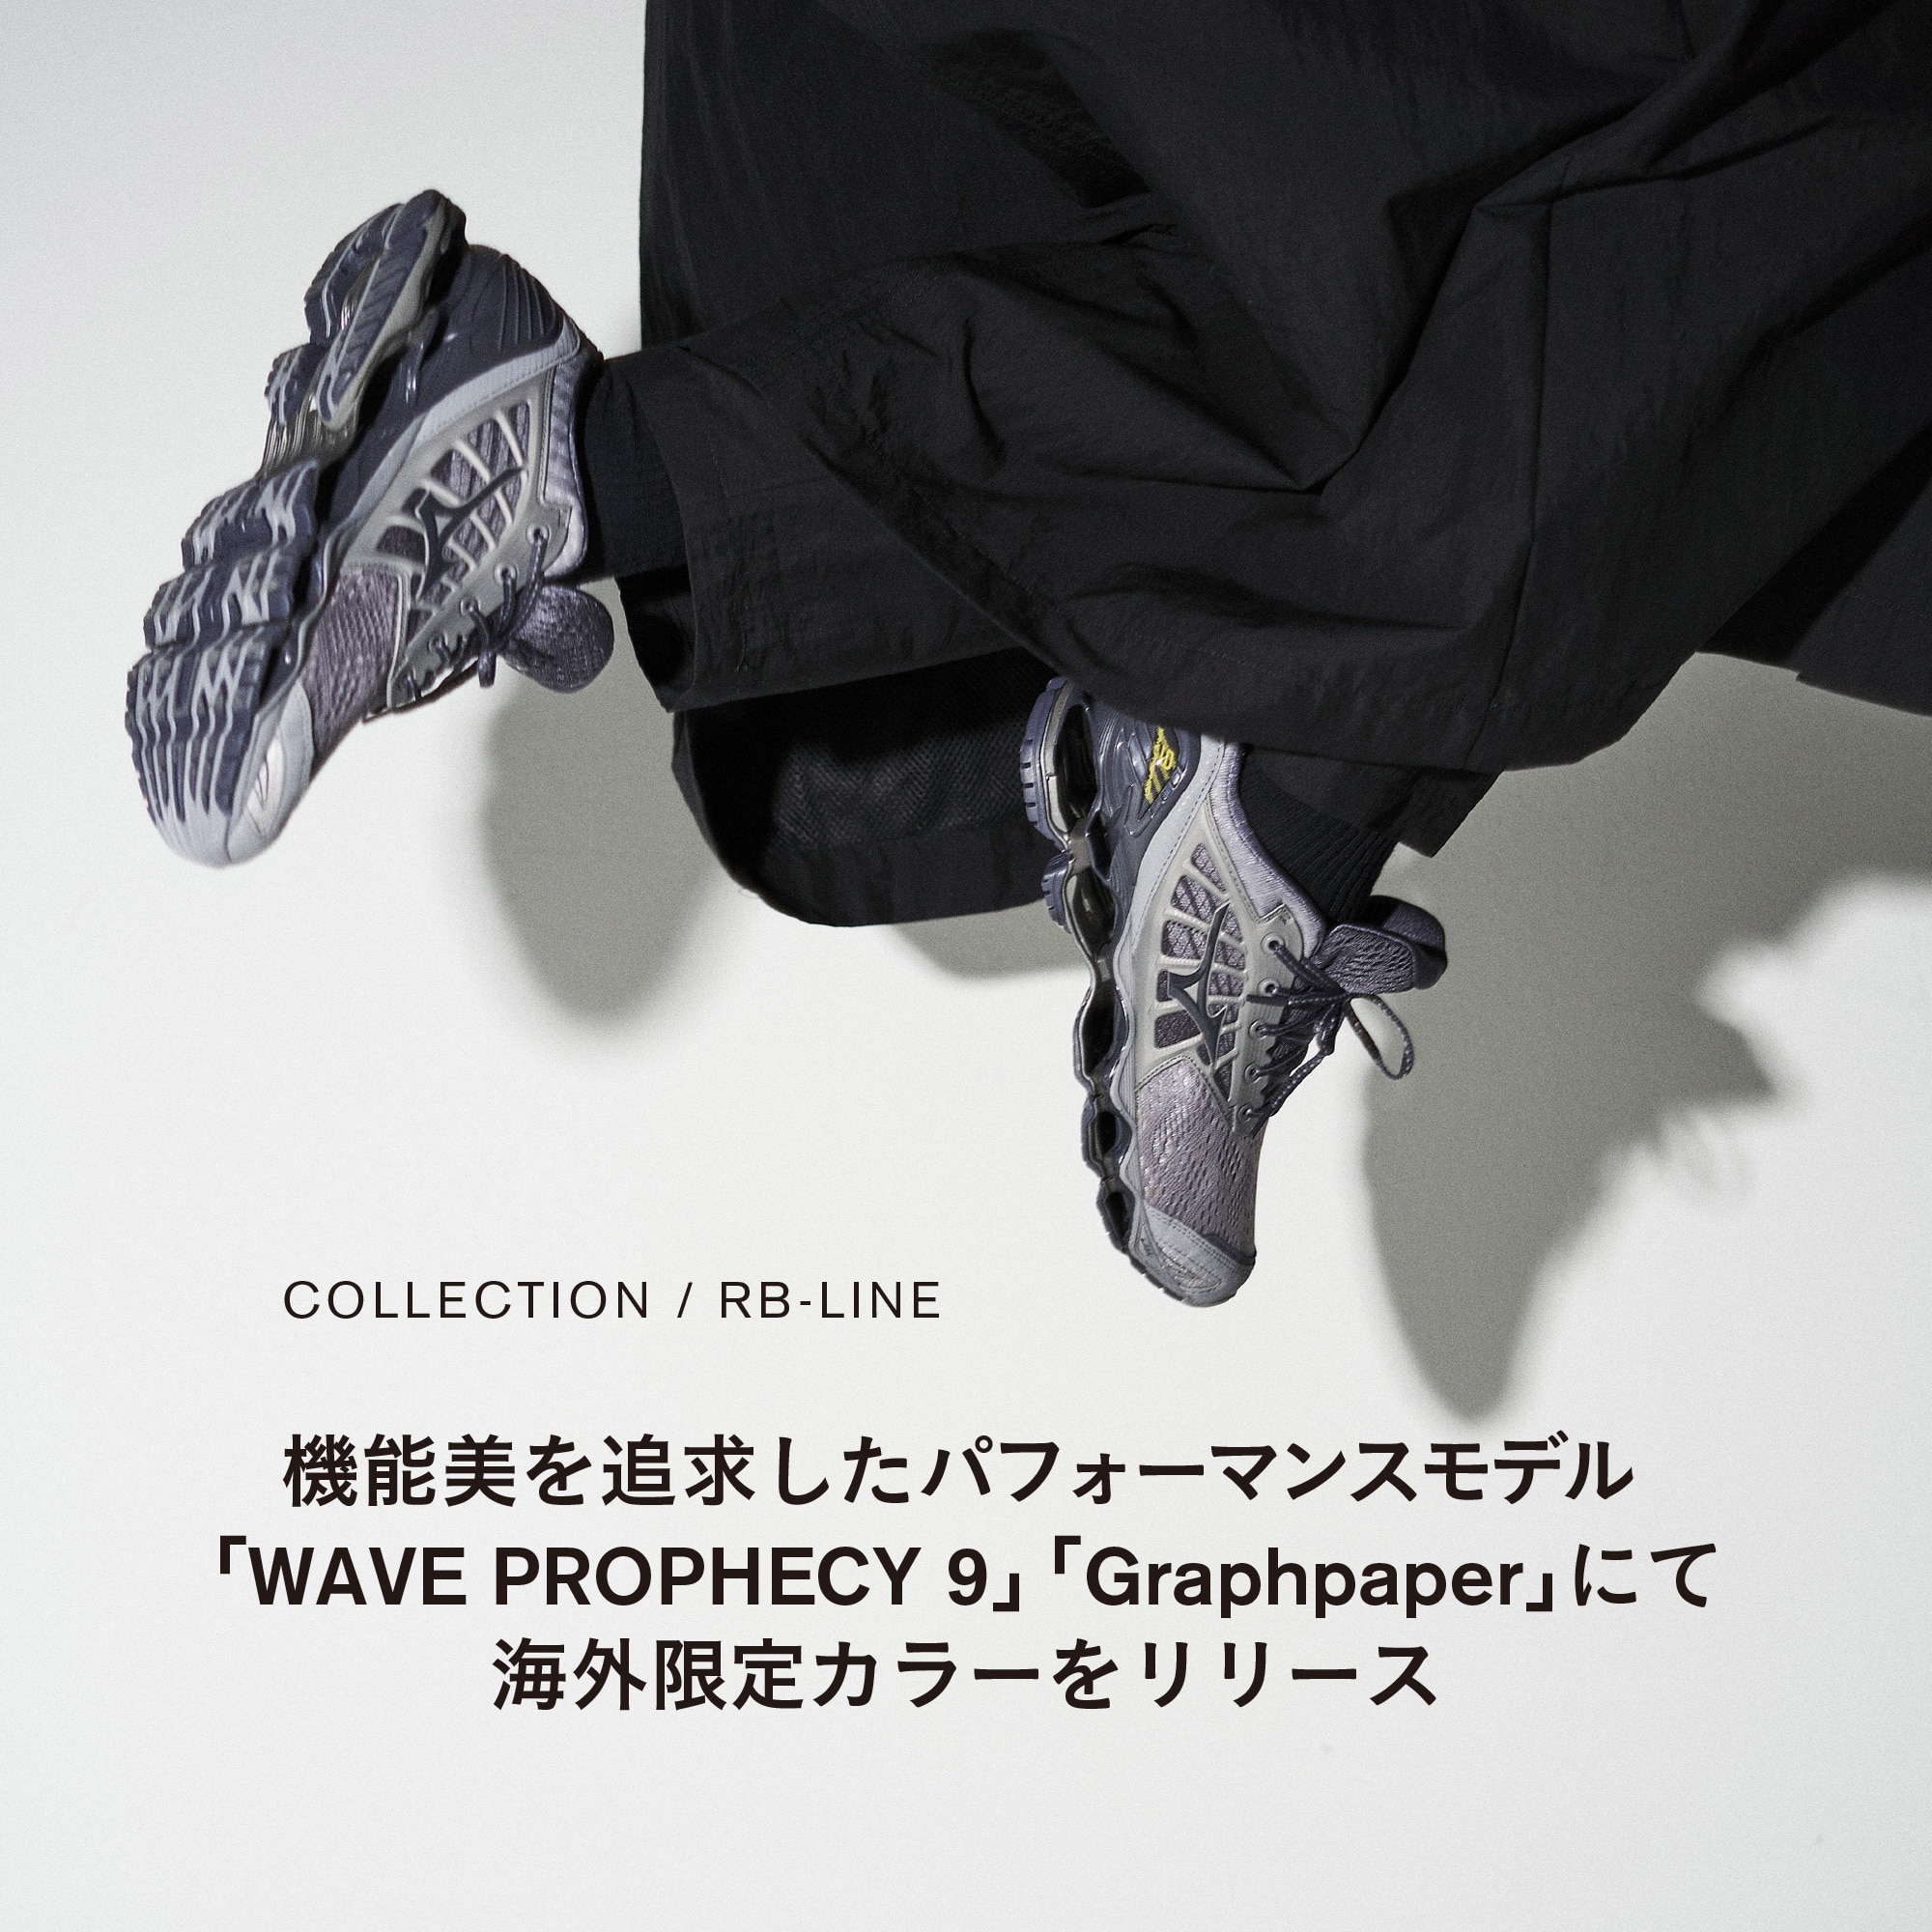 MIZUNO WAVE PROPHECY X for Graphpaper - スニーカー